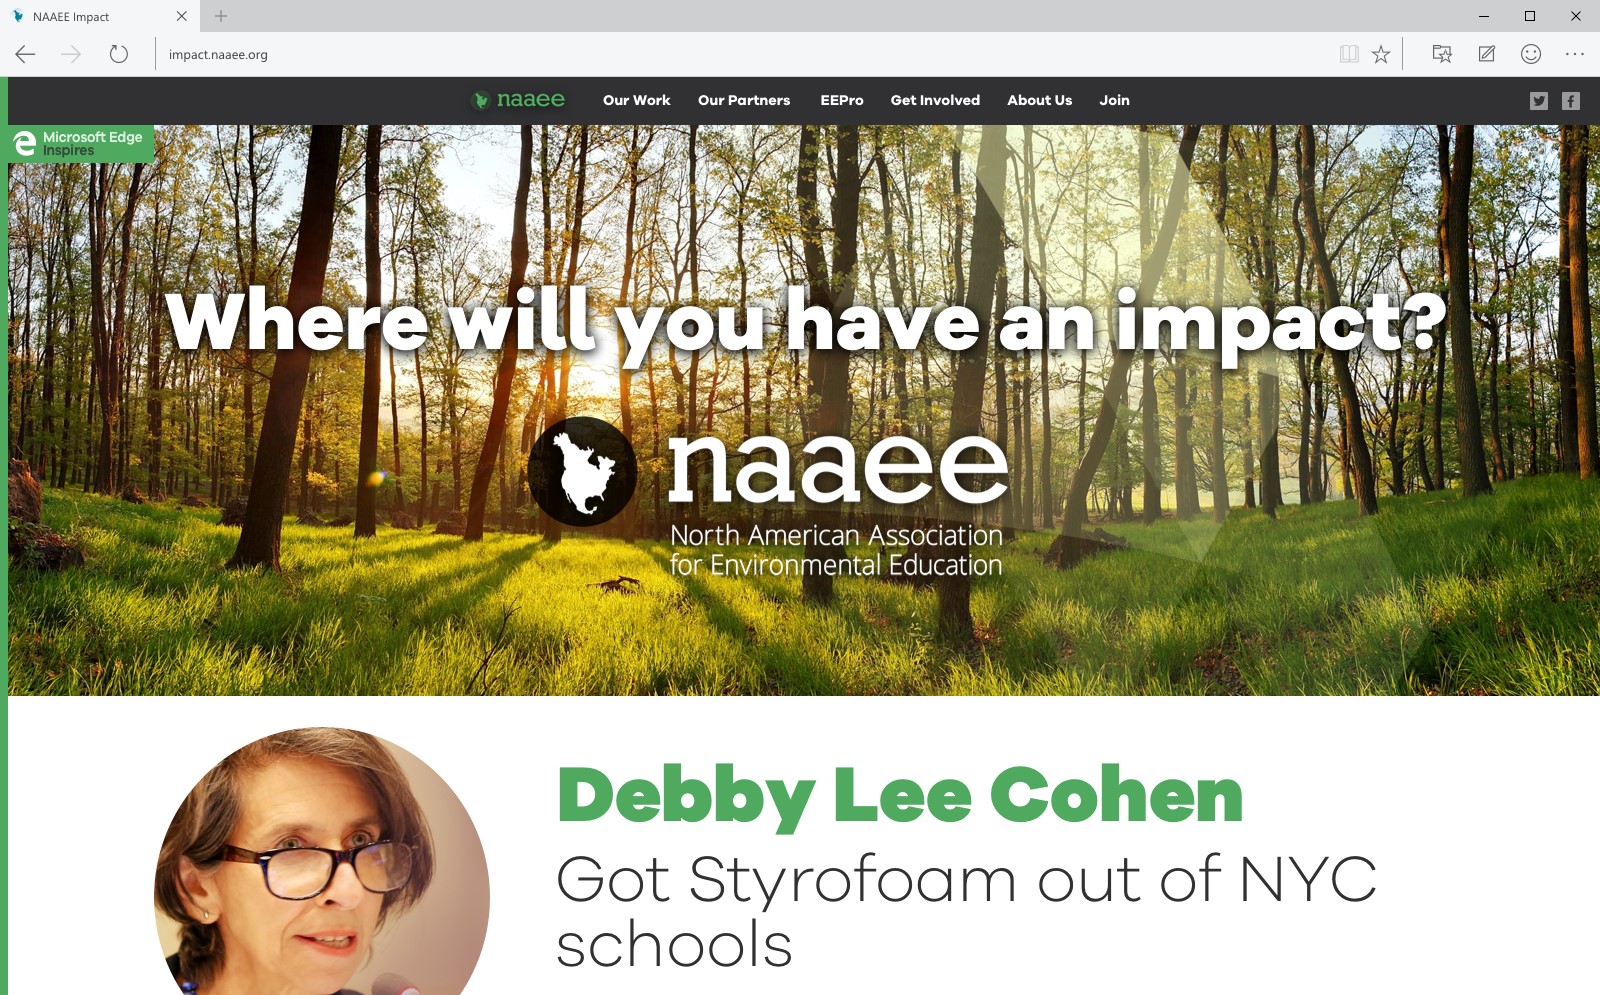 NAAEE partners with Microsoft Edge to deliver a compelling storytelling platform